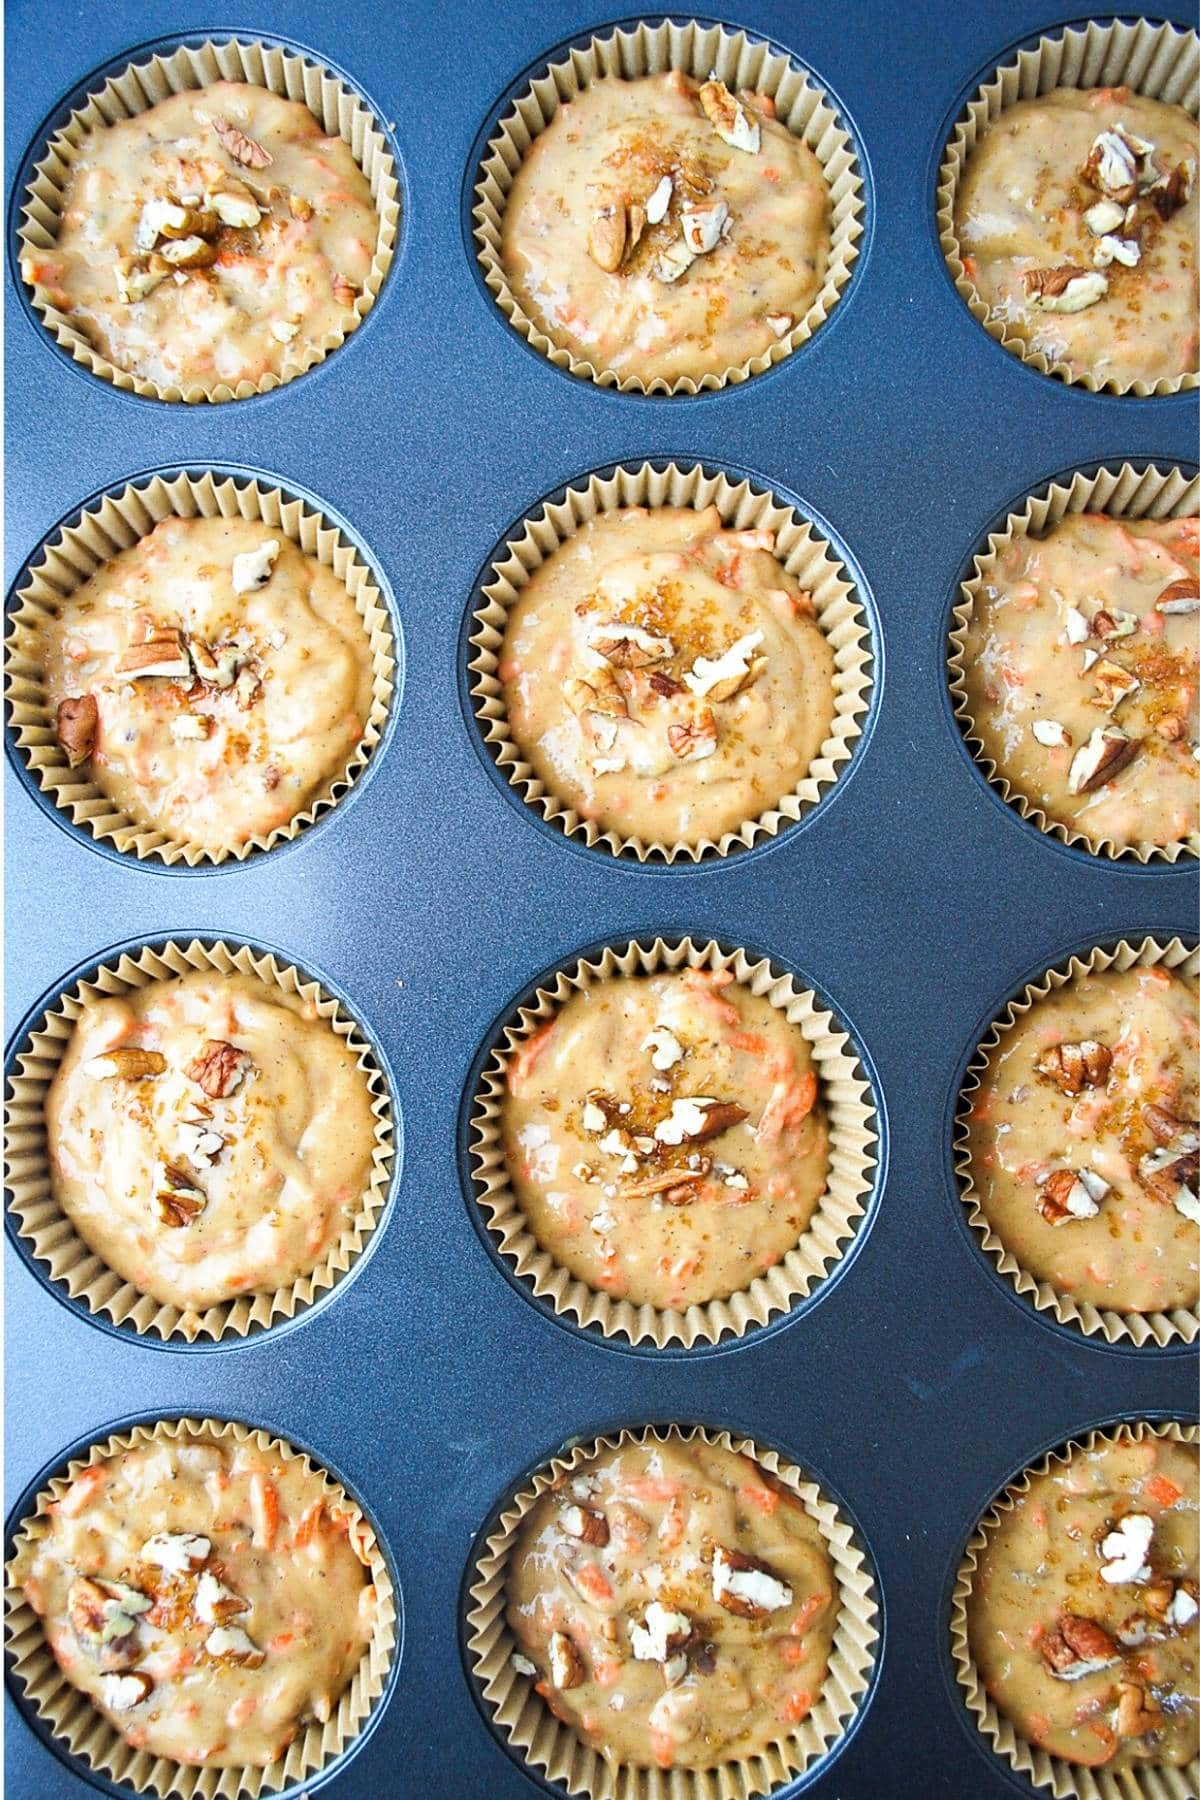 banana carrot muffin batter in lined cupcake tins